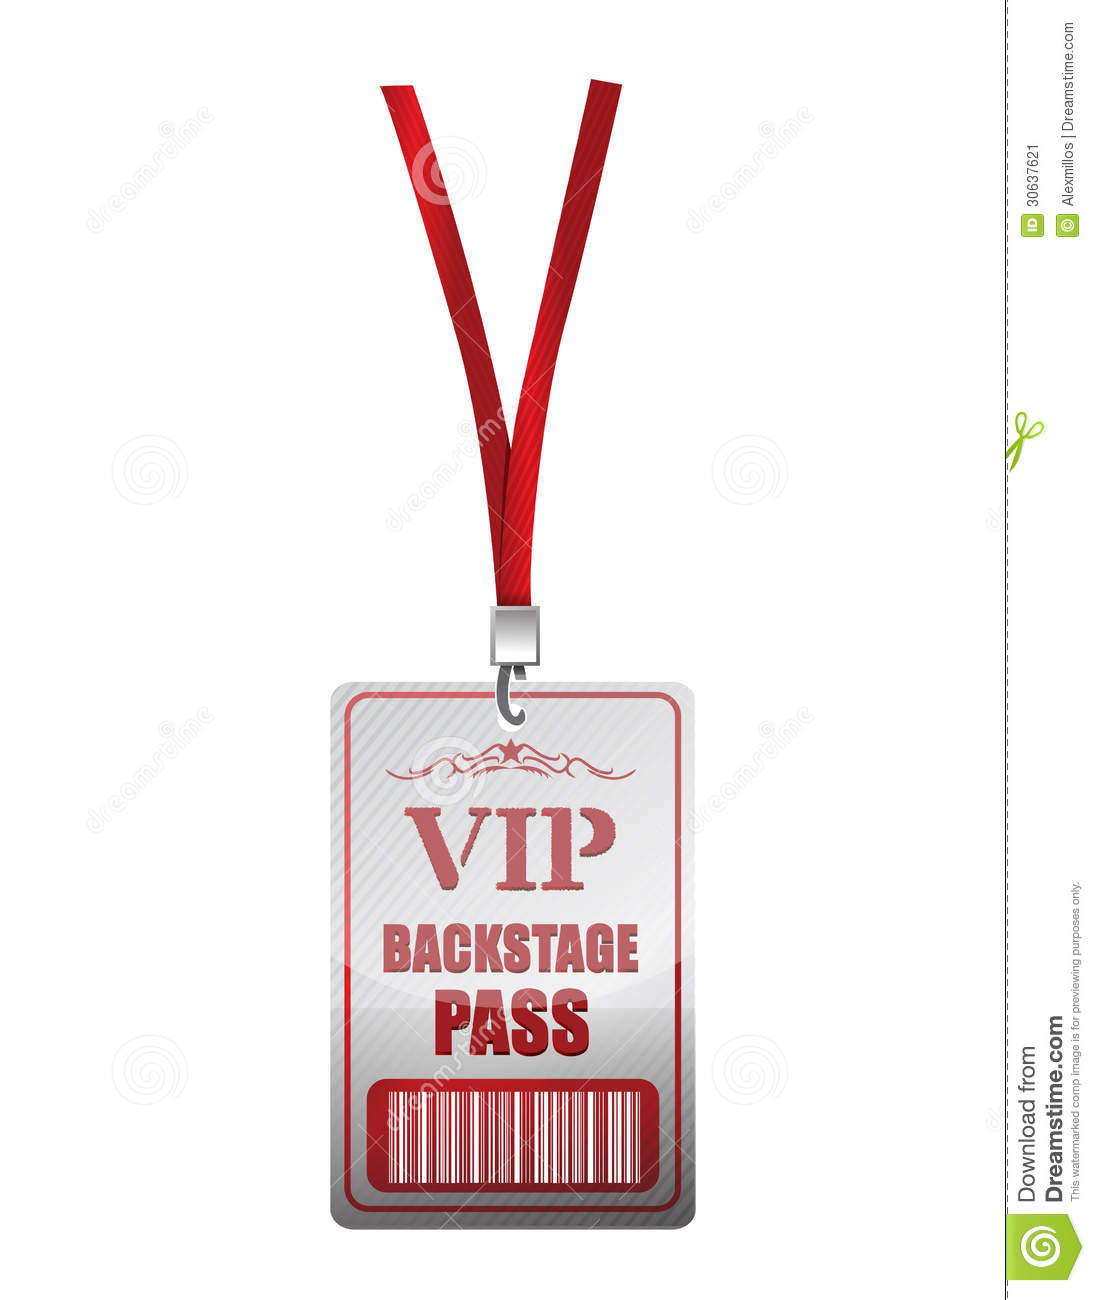 Backstage Pass Pics, Video Game Collection